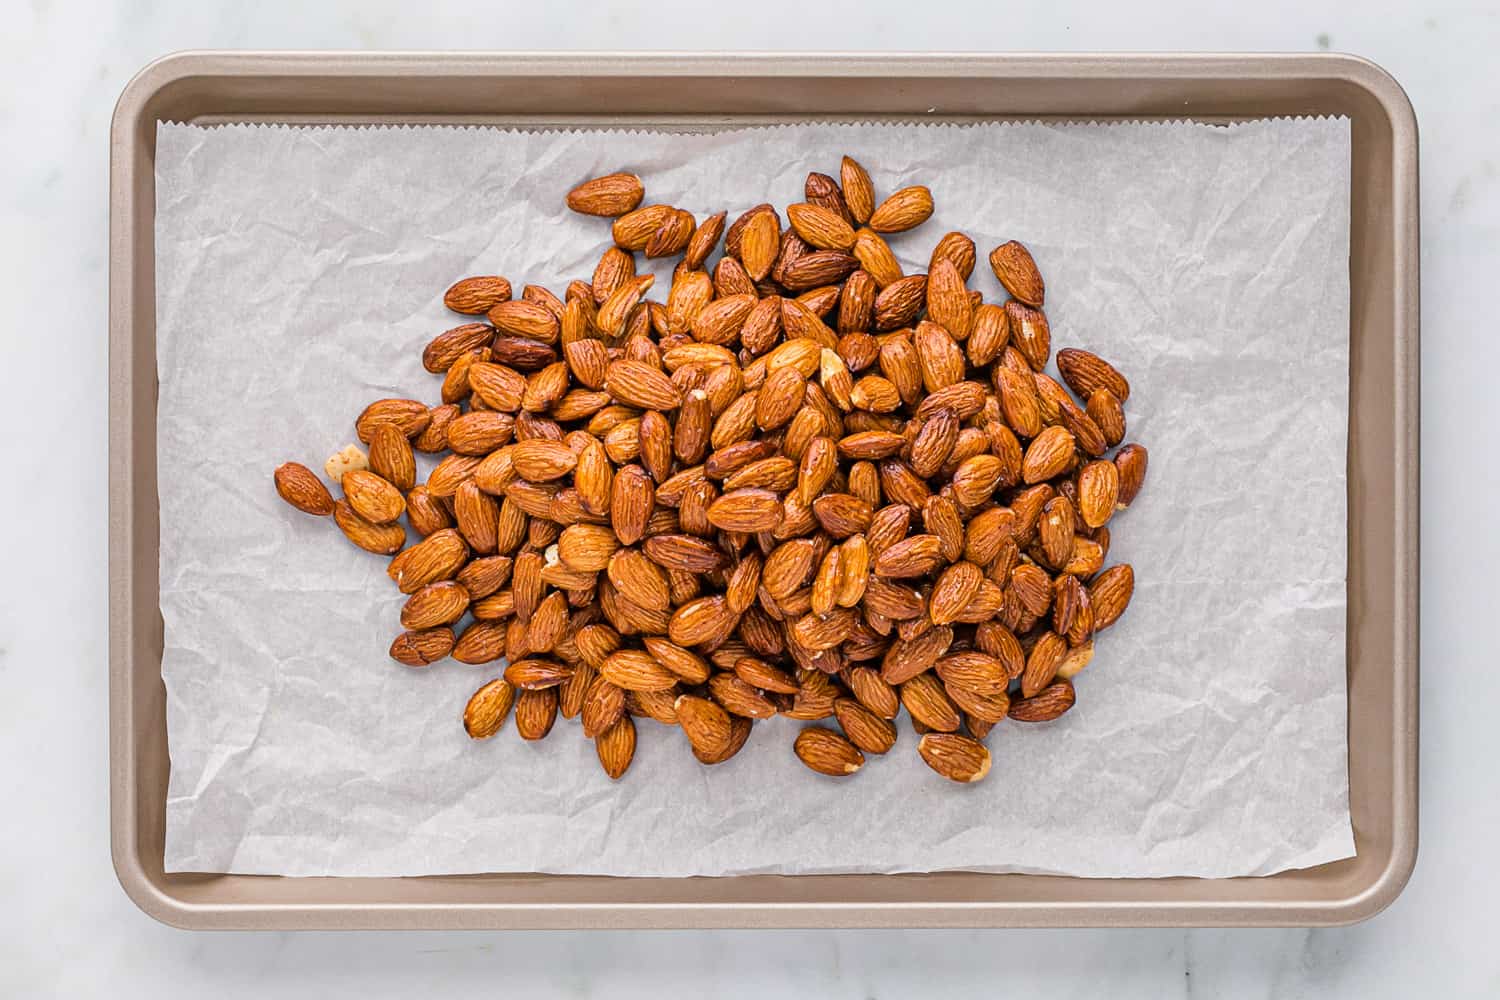 Almonds before baking.